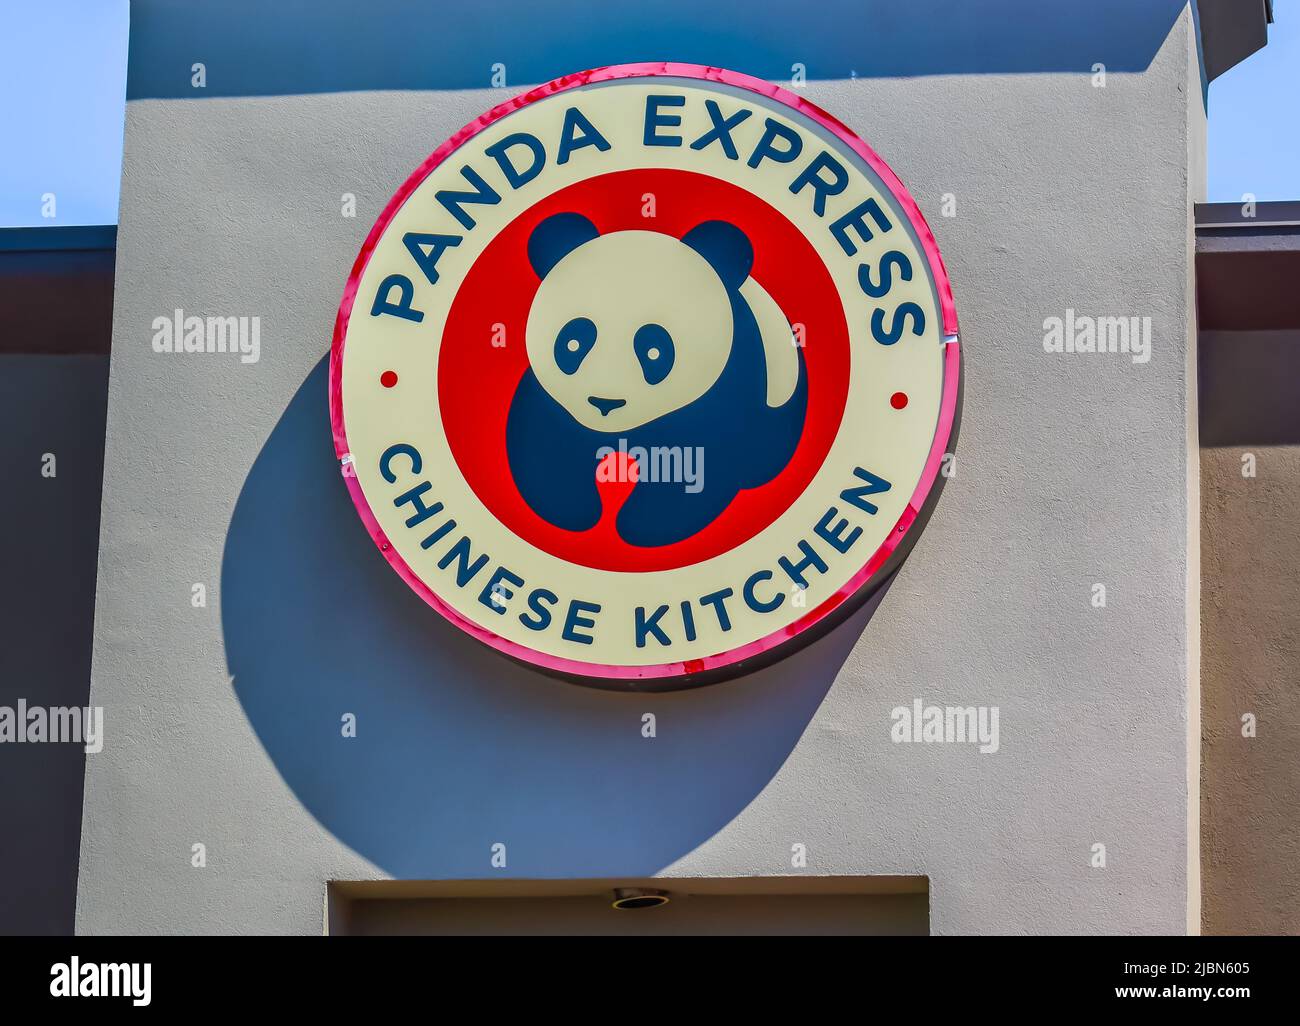 Panda Express Chinese Kitchen's exterior facade circular brand and logo signage in red, black and white in bright sunshine with shadows. Stock Photo